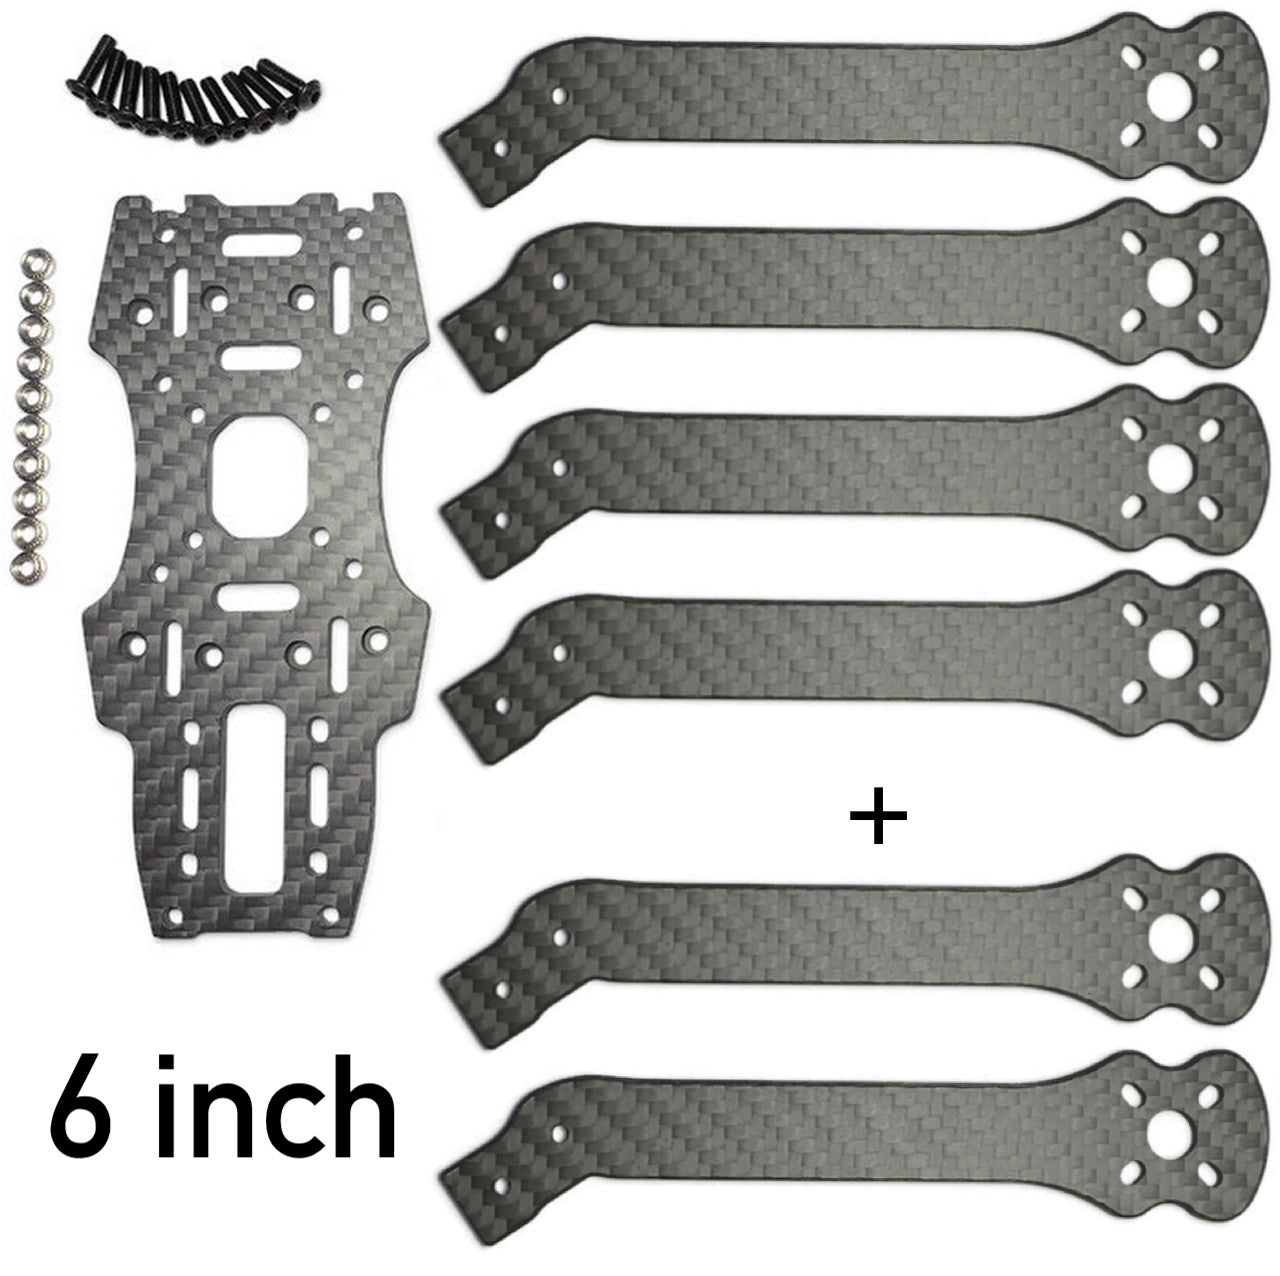 Badger Conversion Kit for Marmotte (+2 extra arms) - Choose 5" or 6"